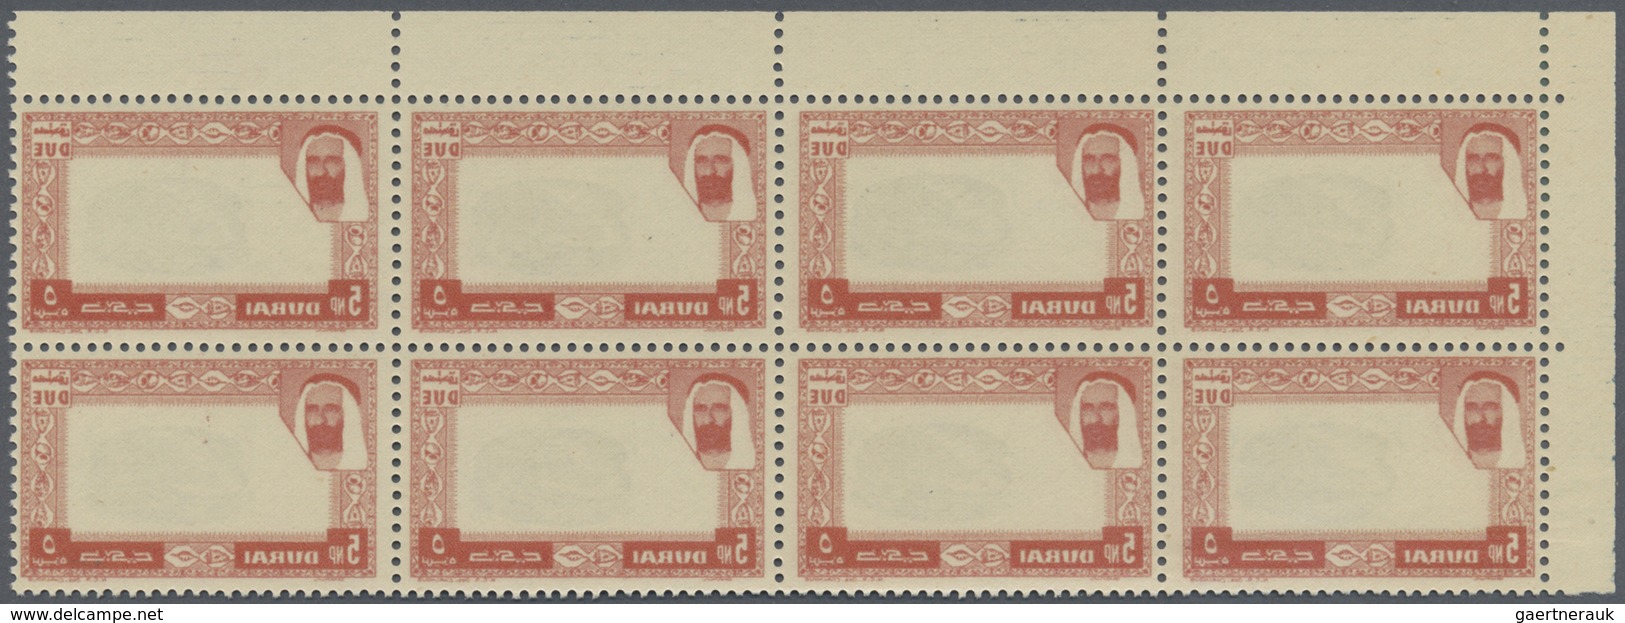 ** Dubai - Portomarken: 1963, Mussel 5np. With OFFSET Of Orange-red Frame In A Perf. Block Of 8 From Up - Dubai